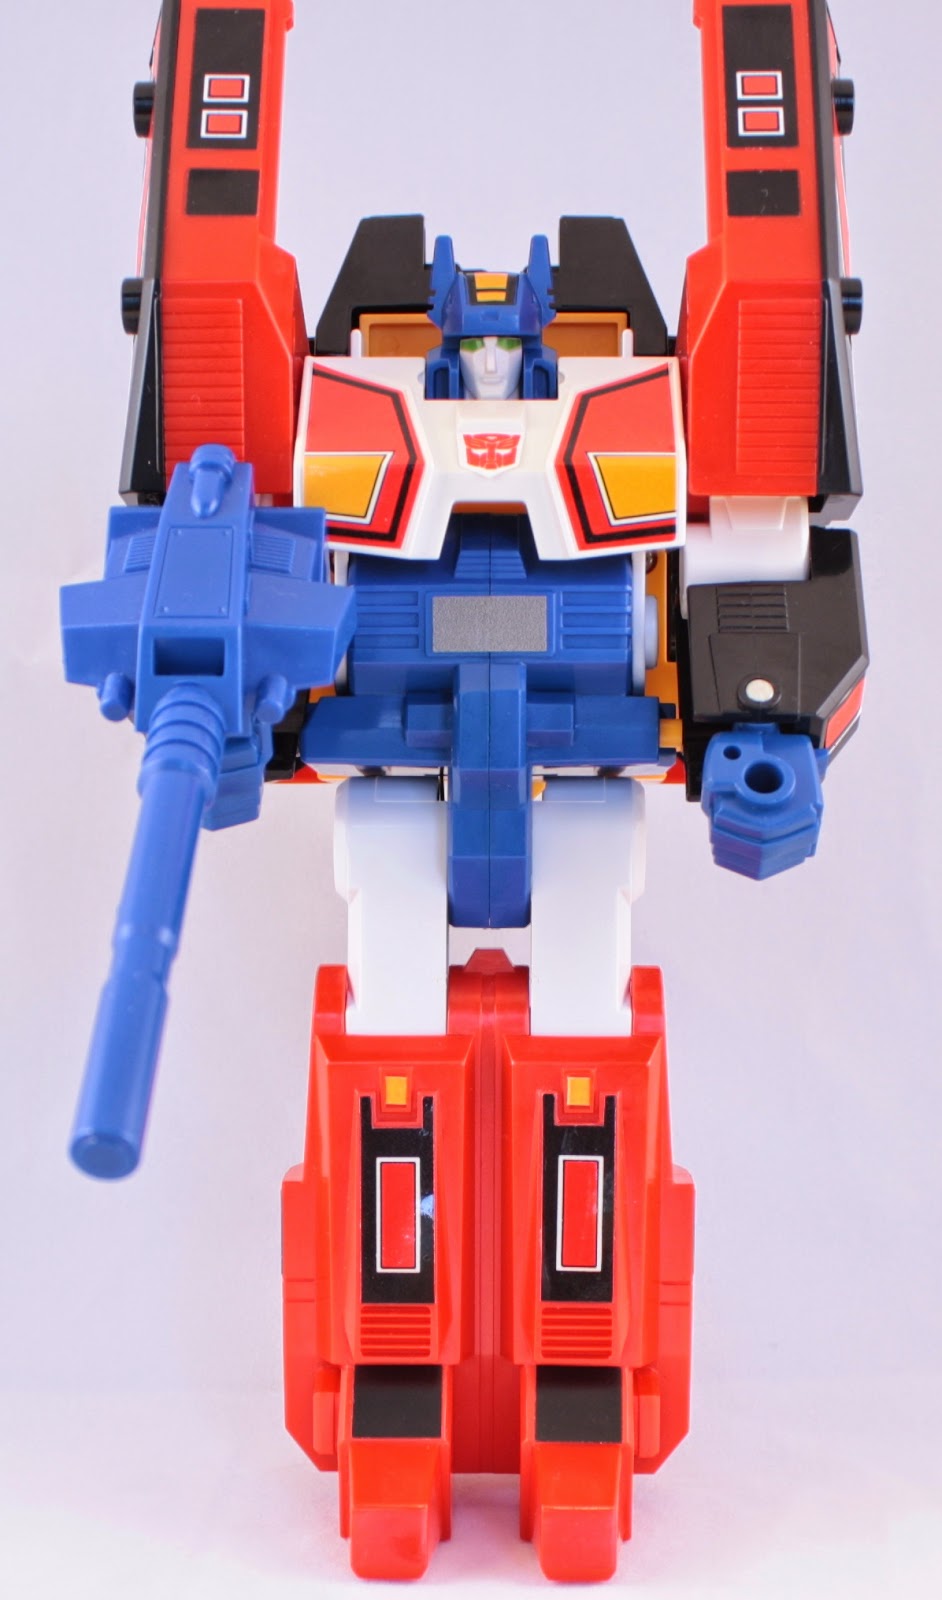 Transformers News: Domestic Listings for Takara Transformers LG-EX Big Powered and Comparison to G1 Figures